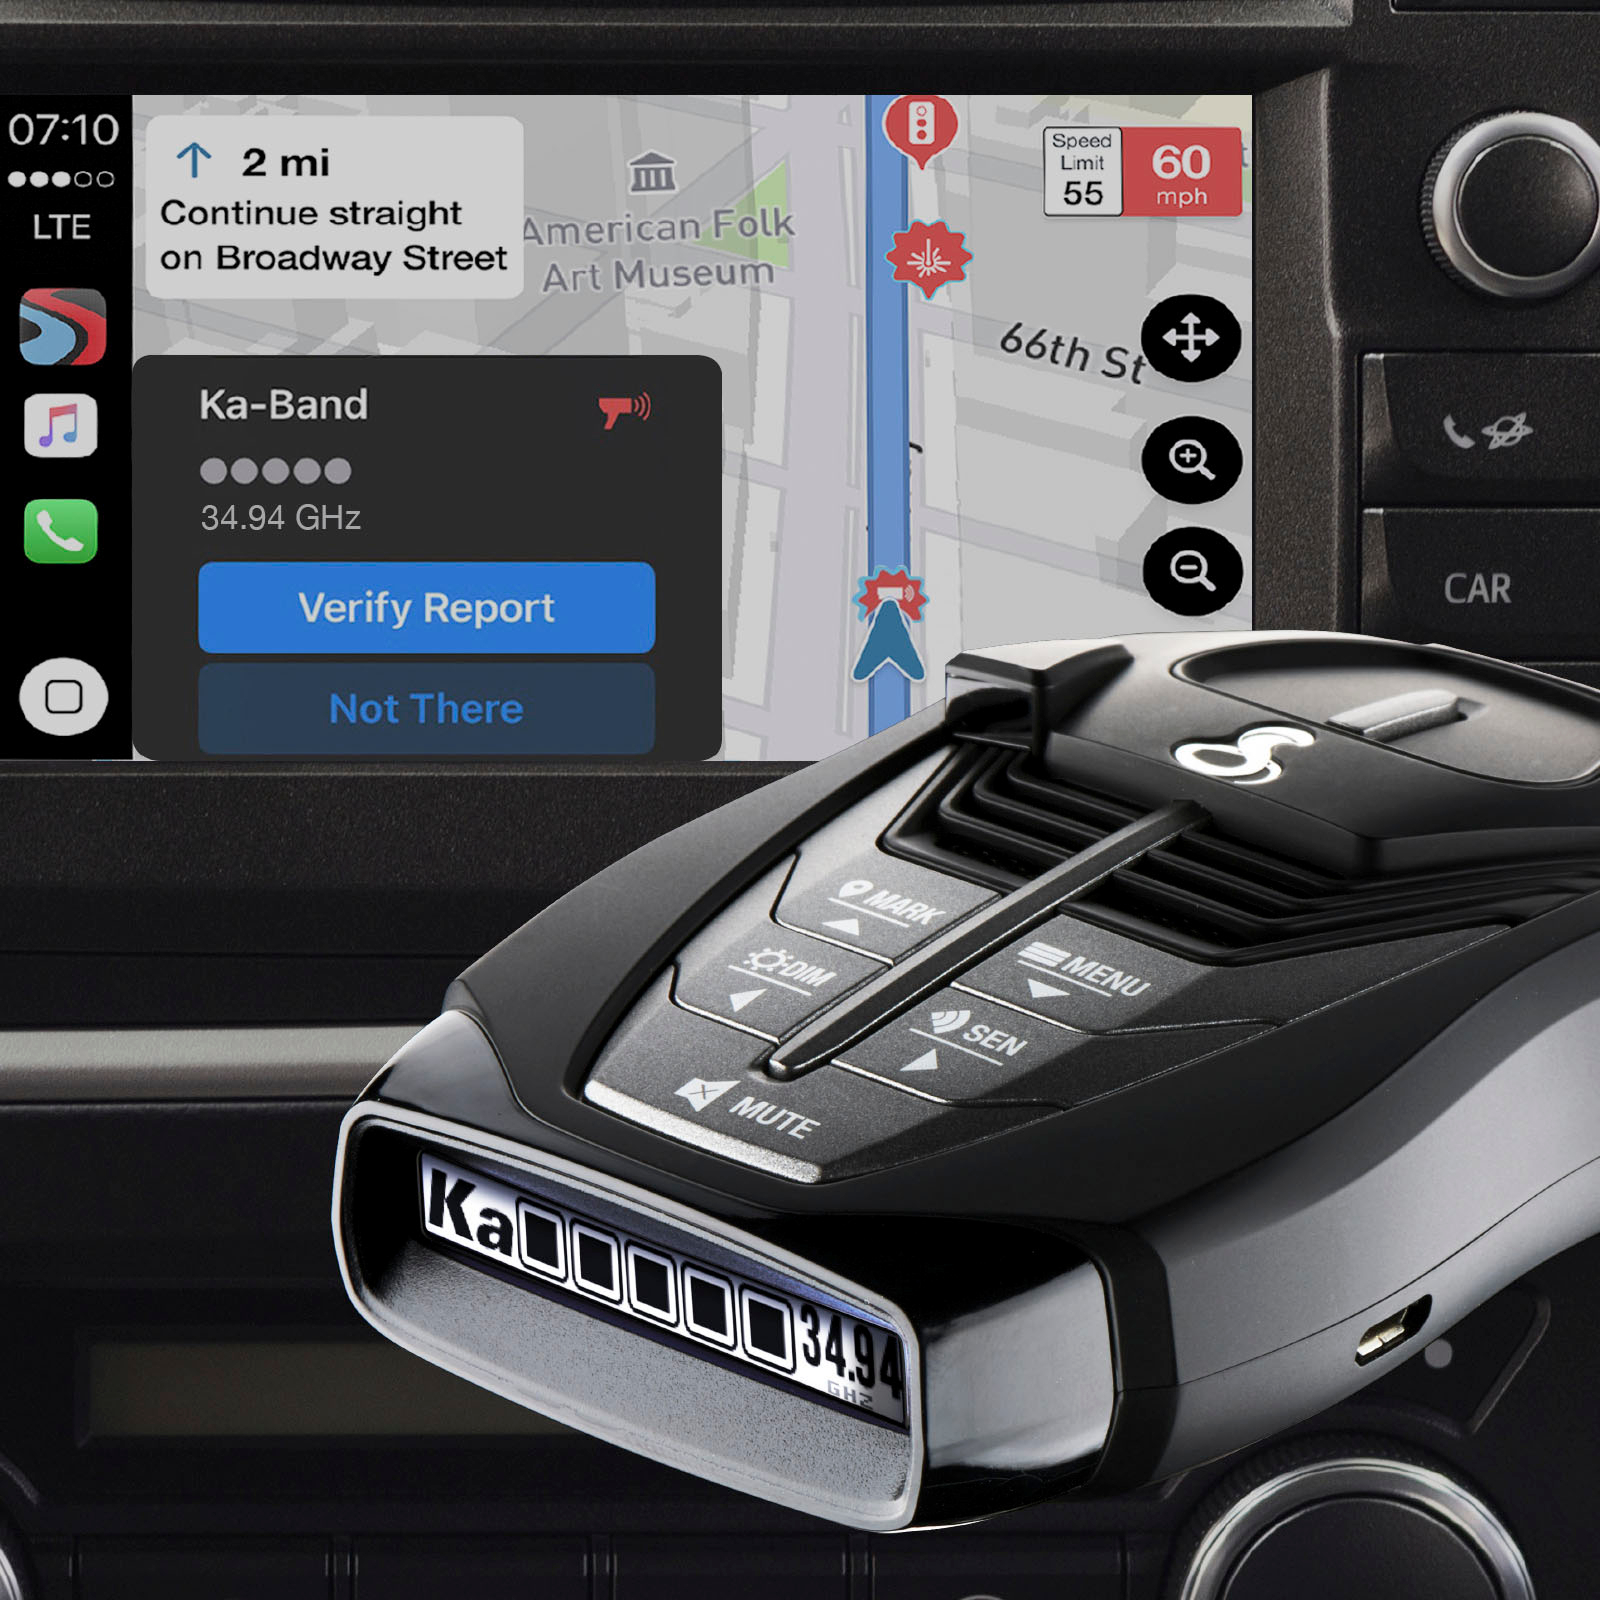 Left View: ESCORT X80 Connected Laser & Radar Detector with Live Streaming Alerts from the Cobra / ESCORT Driver Network. (0100018-4)